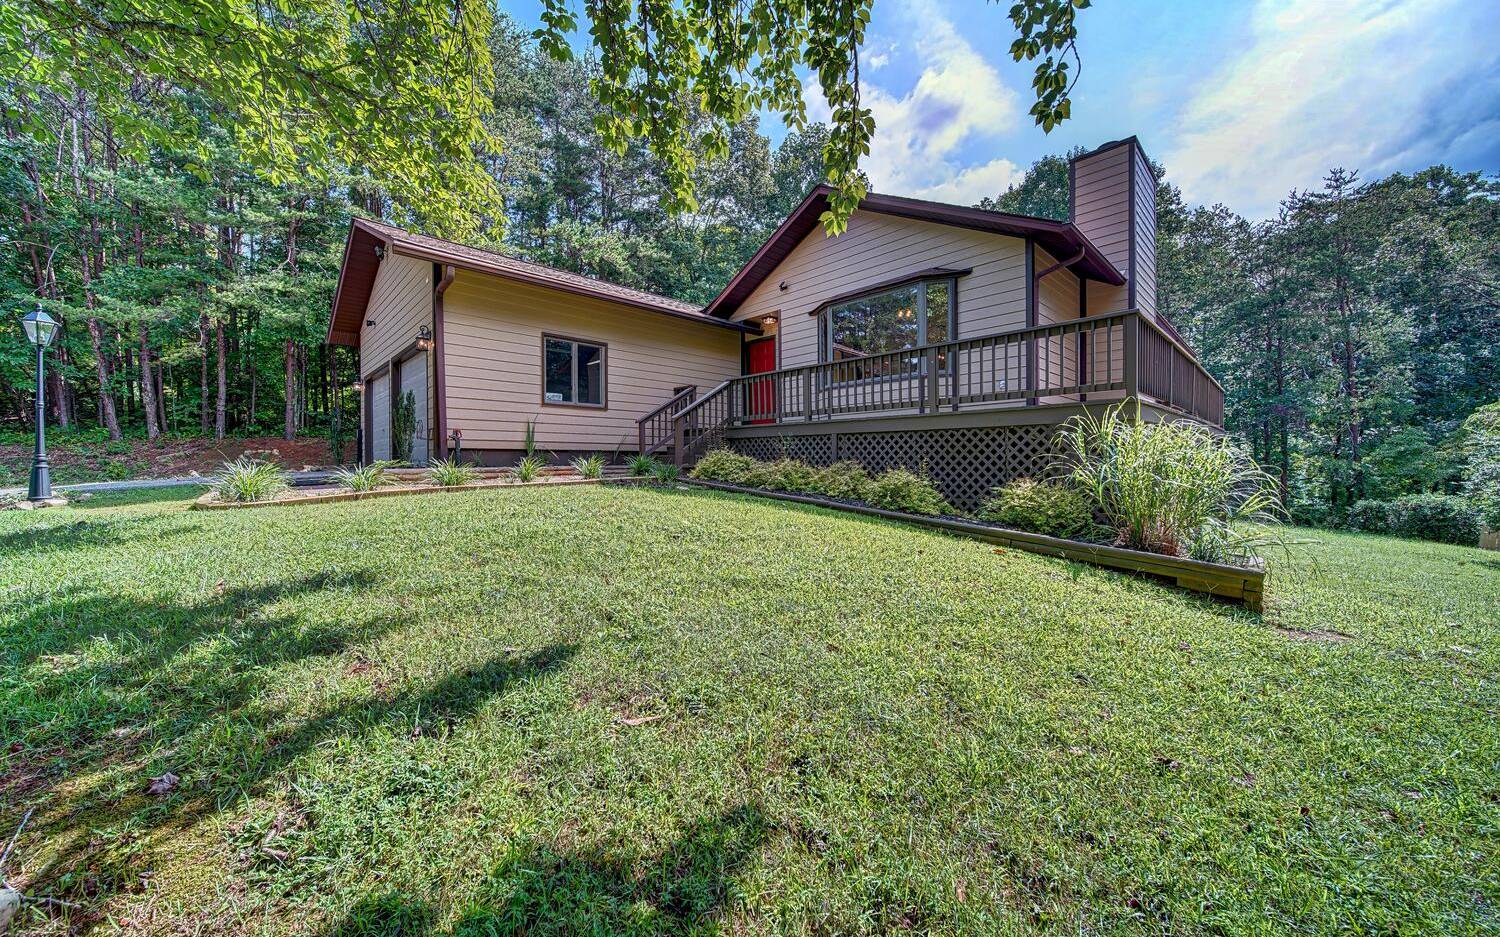 Sweet!!! Remodeled perfect size 3BR home in one of areas most established neighborhoods. This Pinecrest home is only 1 mile from Brasstown Valley Resort, 3 minutes to Young Harris College & Lake Chatuge & less than 10 minutes to Hiawassee. The home has been lovingly upgraded with new floors, kitchen, stainless appliances, granite countertops throughout & light and plumbing fixtures. The lot is a hard to find gentle 0.65 acres. The main level includes the Master suite with a bath that features tile floors, shower & double vanity as well as a guest BR & BA. The Great room has a real FP, cathedral ceilings & is open to the Kitchen & Island with a sink and bar. Most of the Terrace level has been finished & has a wet bar in a bonus room as well as a huge 3rd BR with bath. There is storage on this level. Other features include a 2 car garage, wrap around deck, covered back porch & outbuilding.